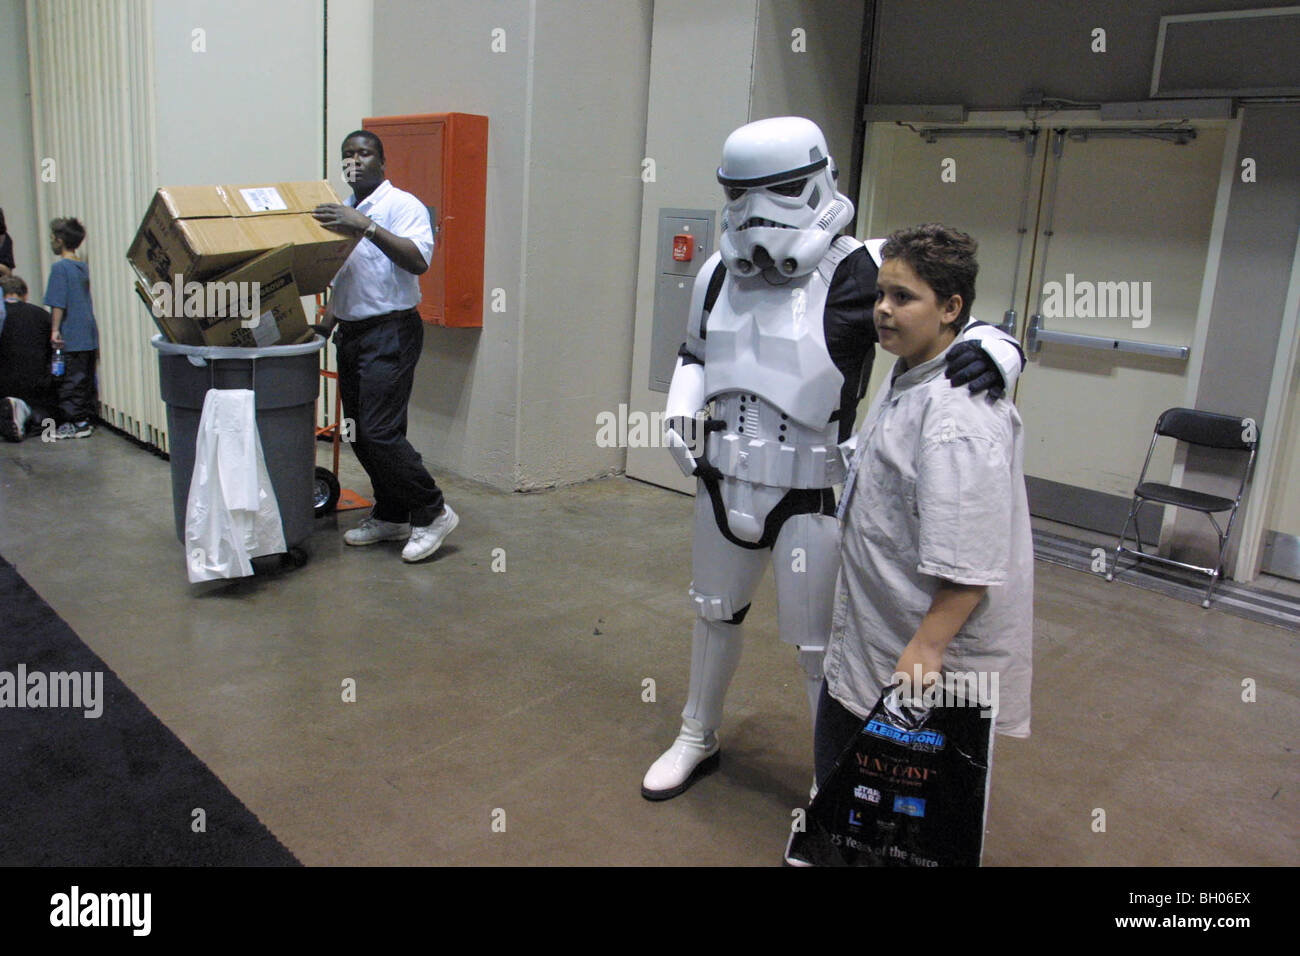 A boy poses for a photo with a Storm Trooper during Star Wars Celebration II at Sunday, May 6, 2002 in Indianapolis, Indiana. Stock Photo